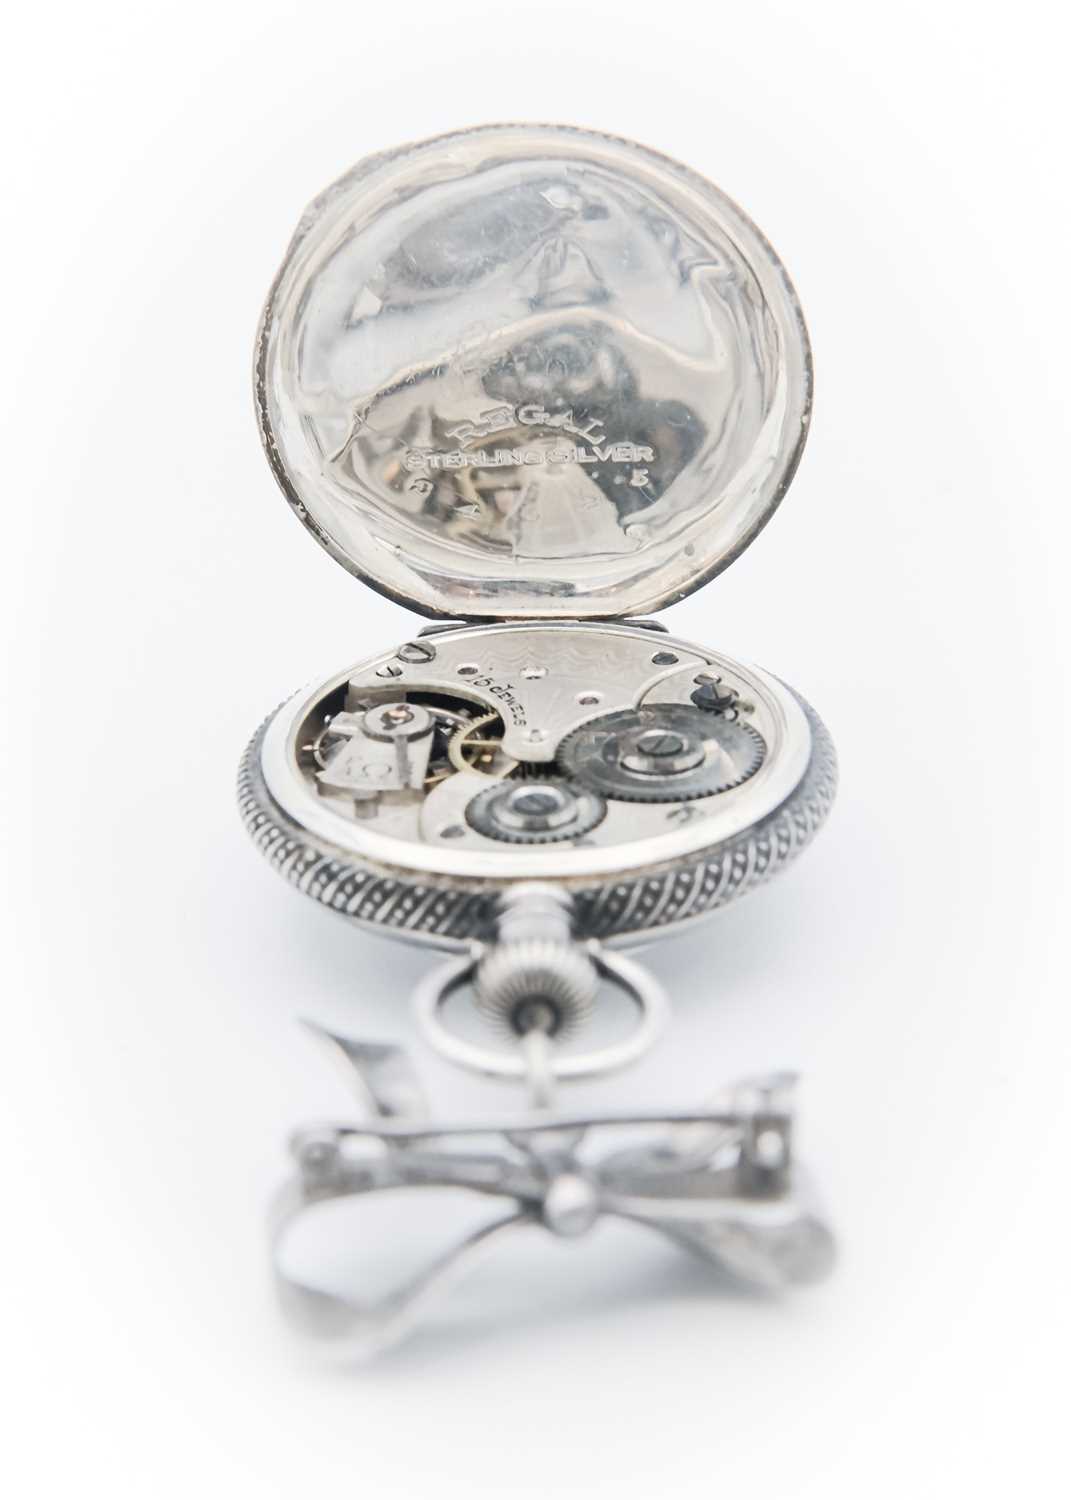 OMEGA - A silver cased crown wind fob pocket watch on silver bow brooch. - Image 3 of 4